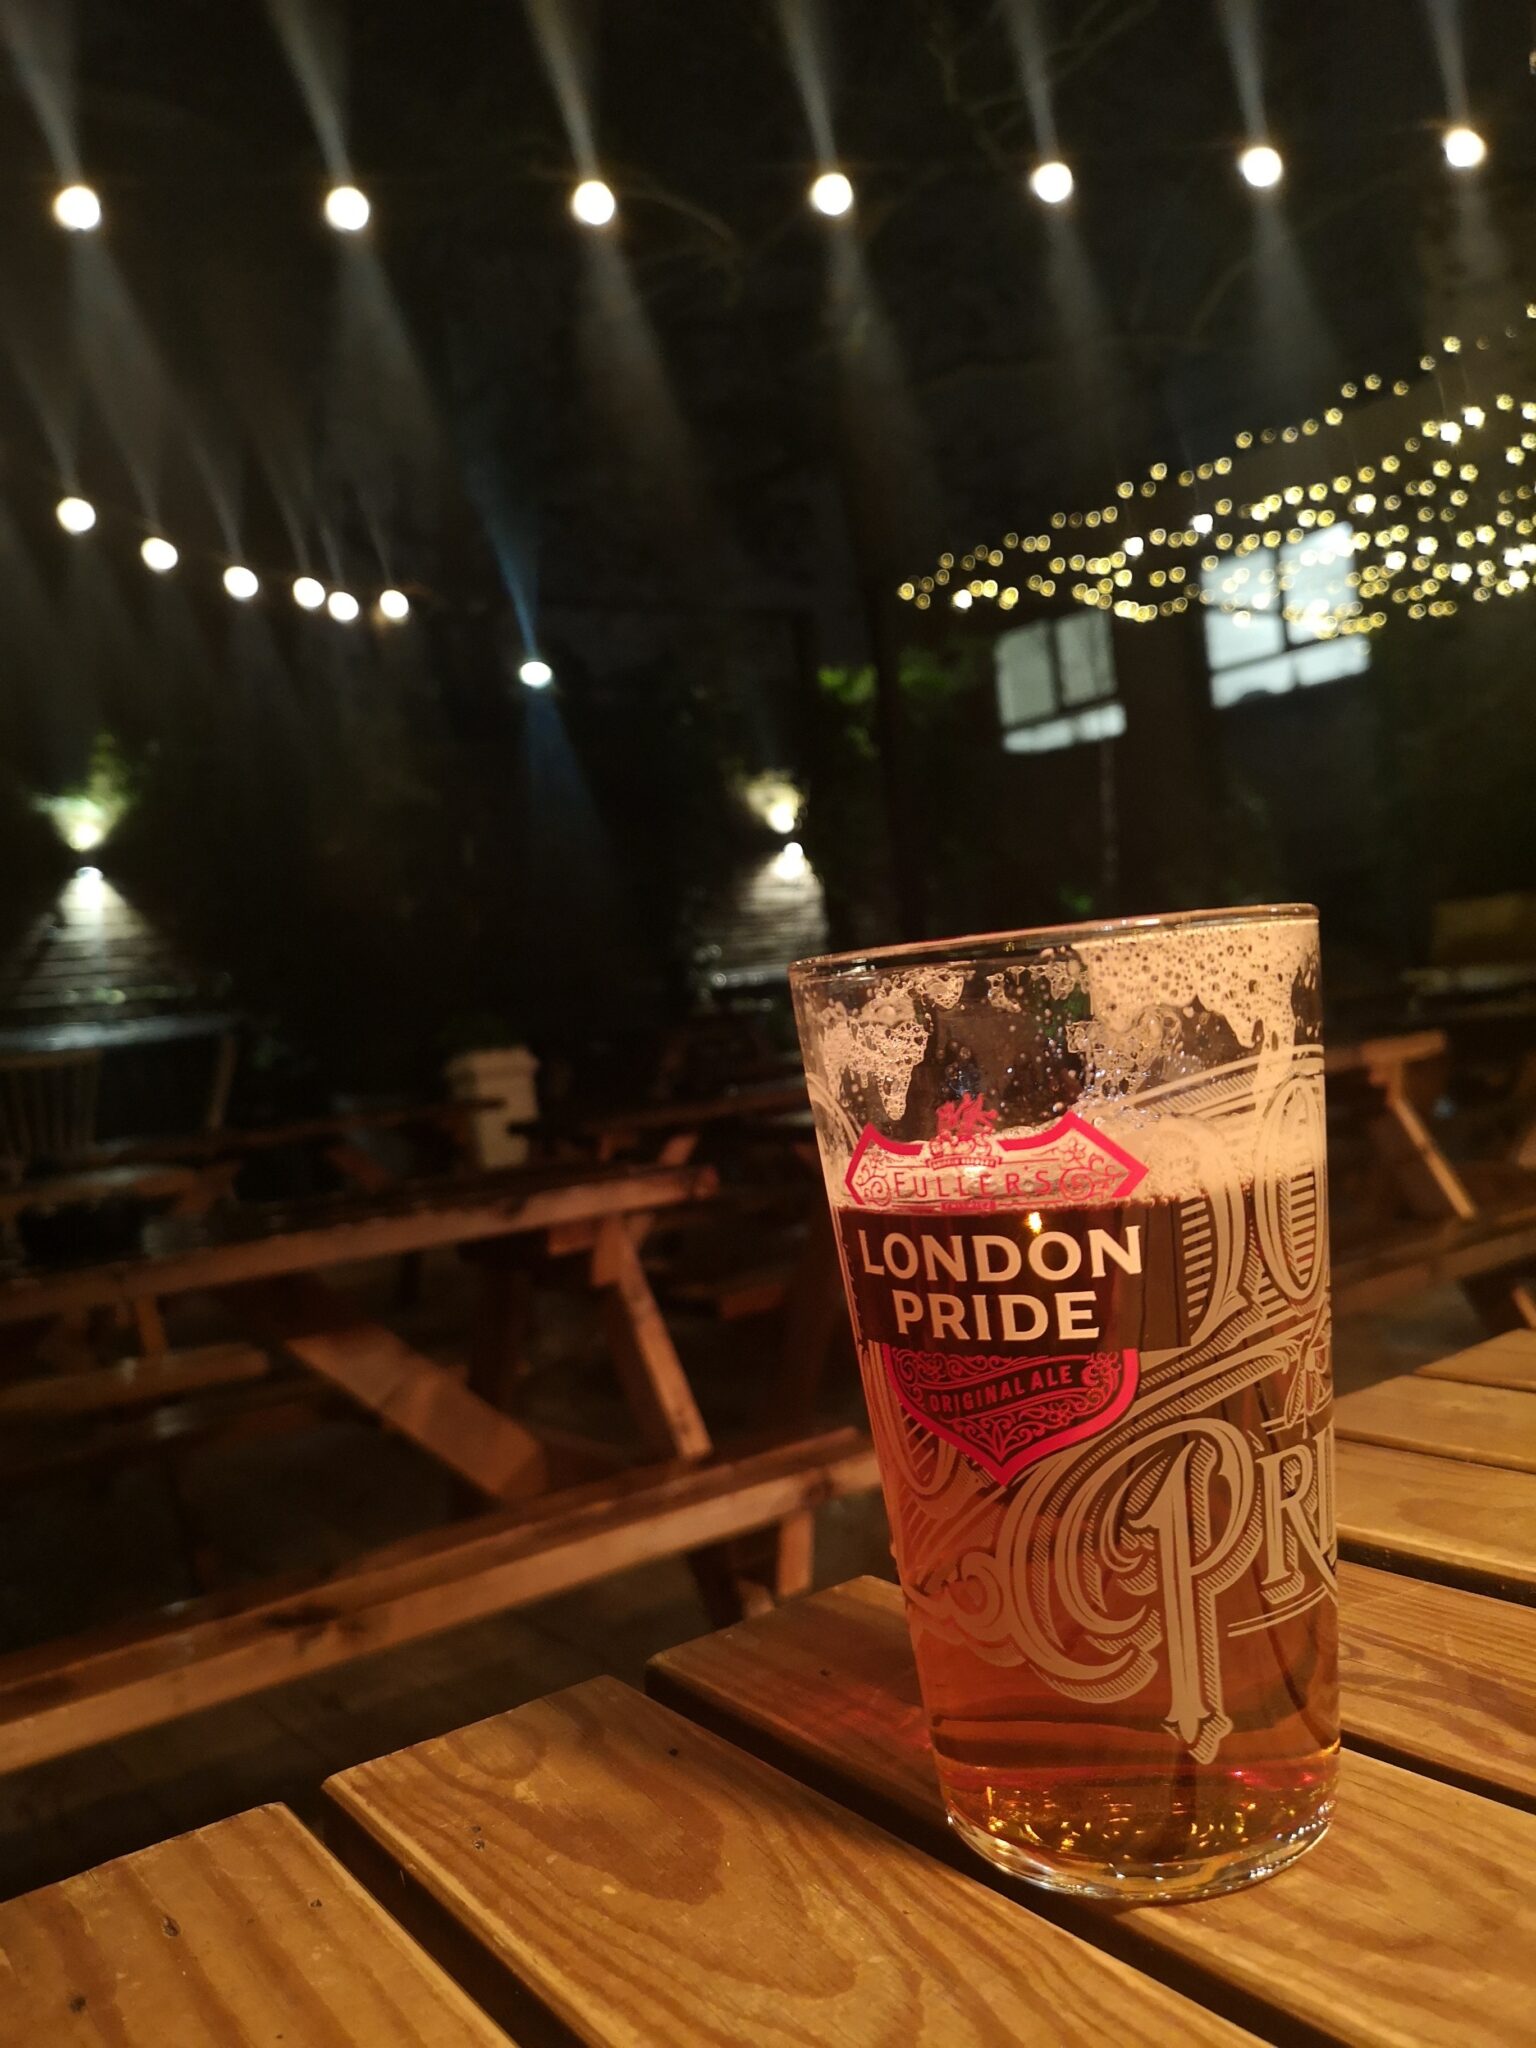 Just for one: my favorite pubs in London